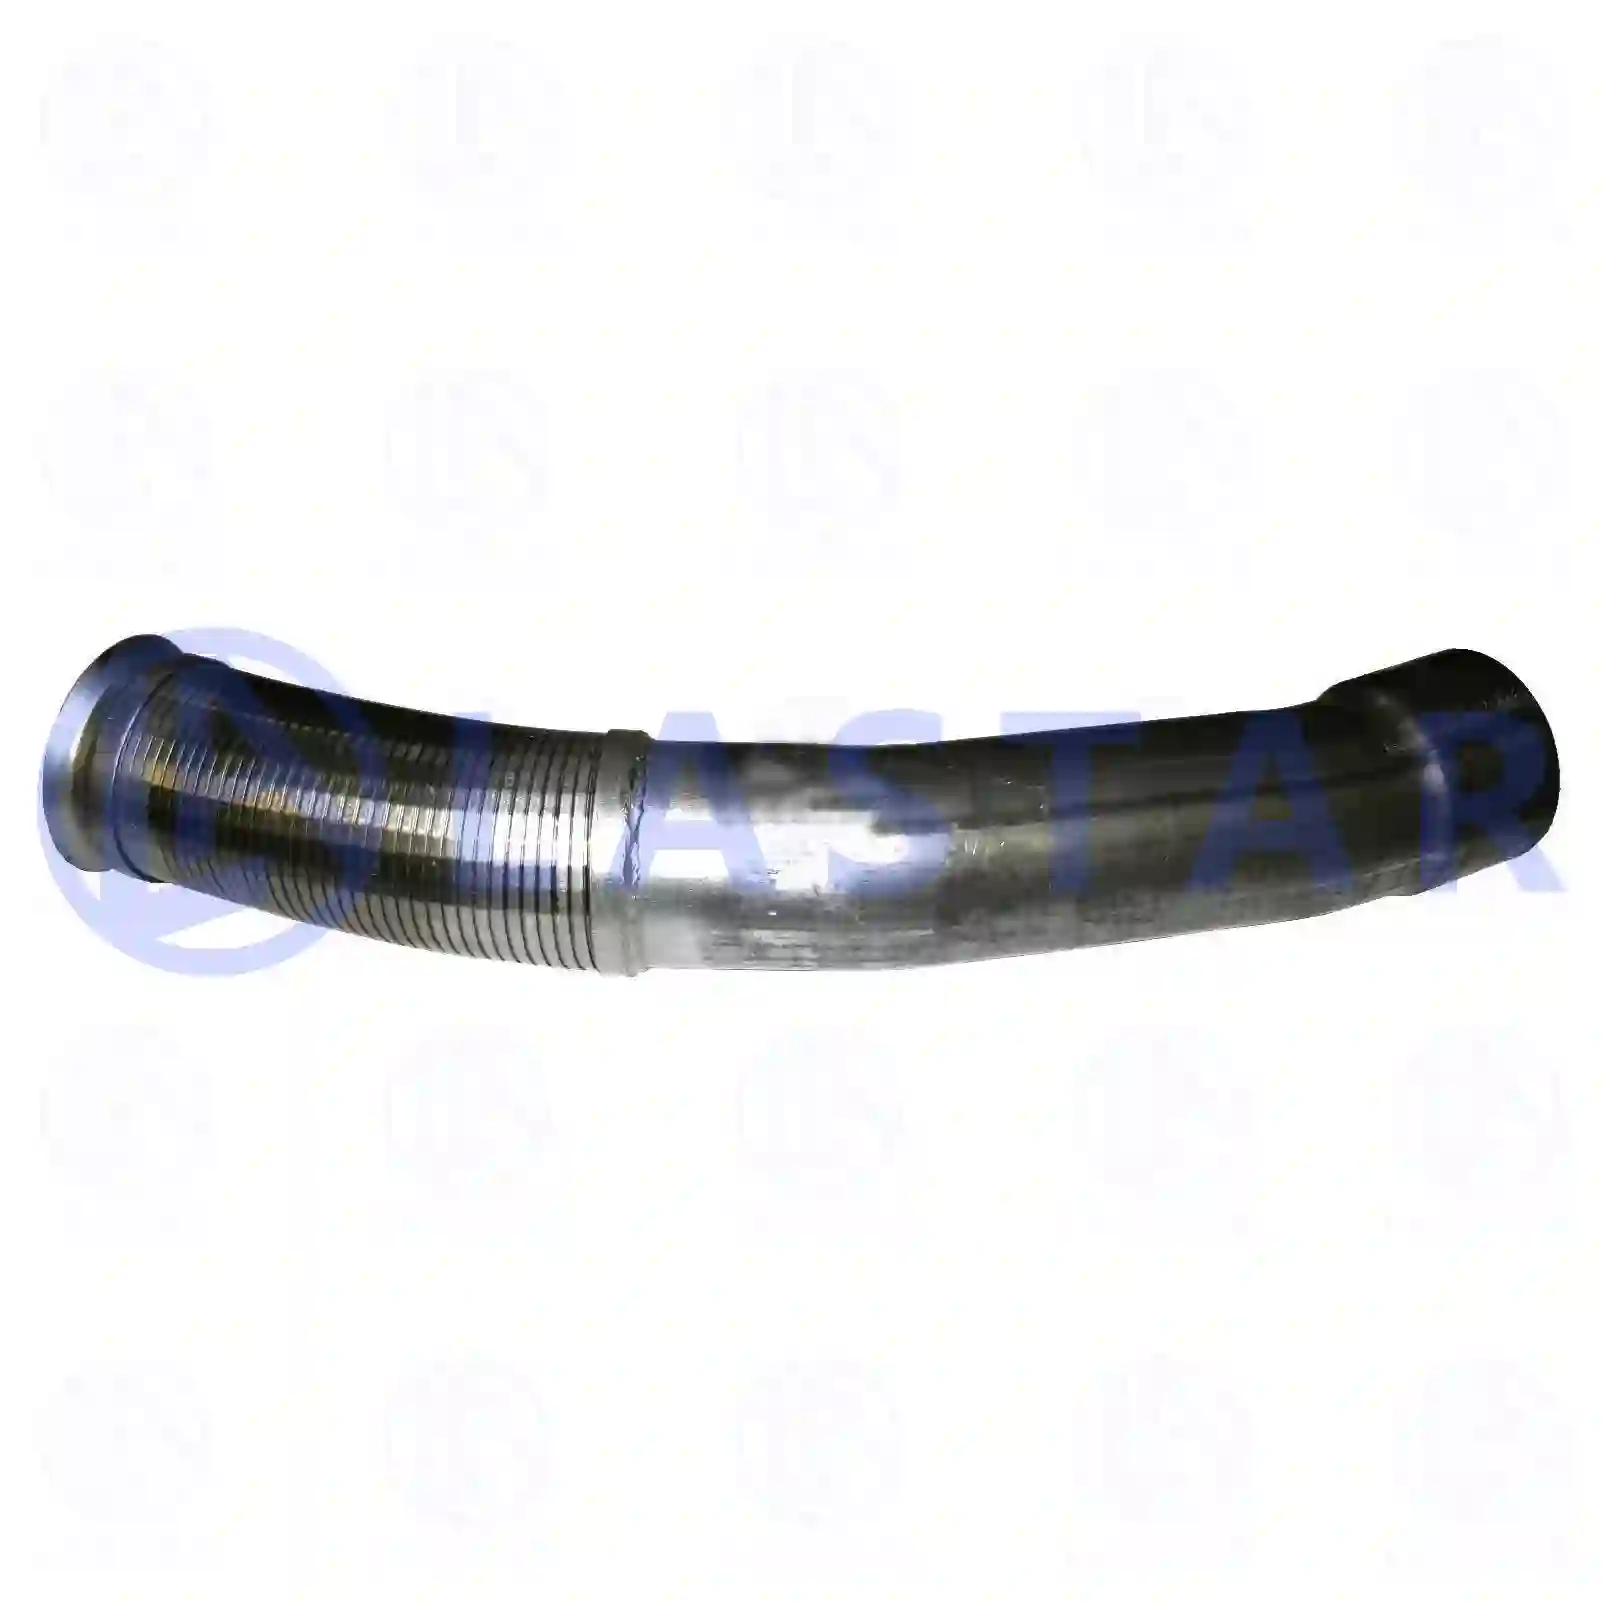 Exhaust pipe, 77706321, 9424903019, 9424904119, ZG10300-0008, ||  77706321 Lastar Spare Part | Truck Spare Parts, Auotomotive Spare Parts Exhaust pipe, 77706321, 9424903019, 9424904119, ZG10300-0008, ||  77706321 Lastar Spare Part | Truck Spare Parts, Auotomotive Spare Parts